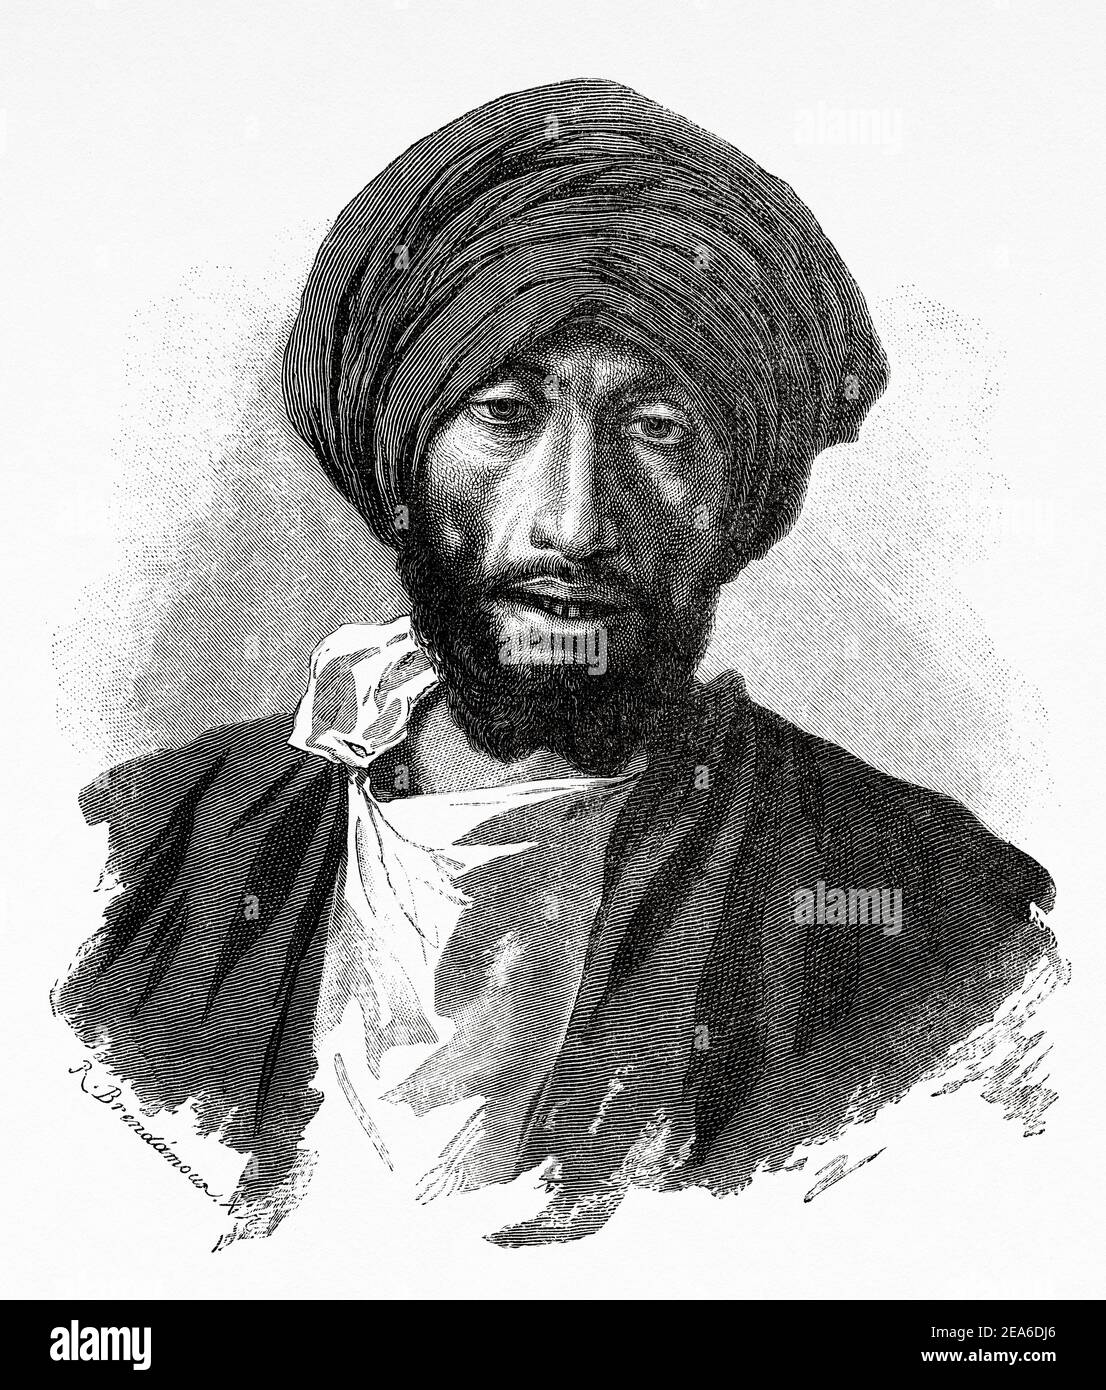 Portrait of Egyptian man of the Coptic religion. The term Coptic refers to Egyptians who profess some type of Christian faith in the Coptic Orthodox Church, the Coptic Catholic Church, or the Coptic Evangelical Church. Ancient Egypt History. Old 19th century engraved illustration from El Mundo Ilustrado 1879 Stock Photo